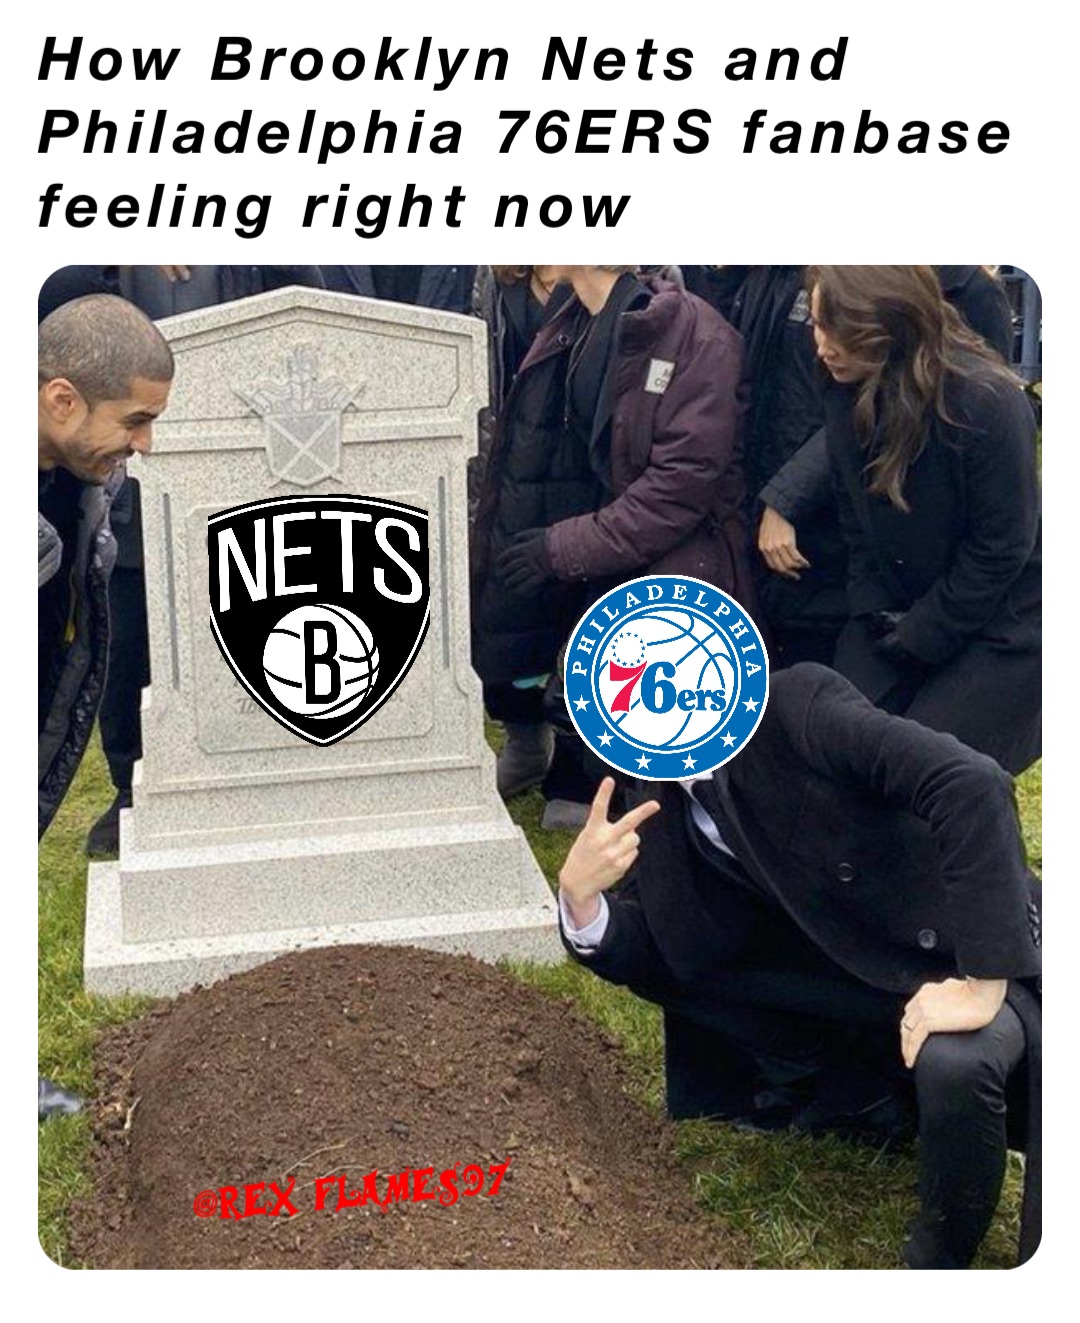 How Brooklyn Nets and Philadelphia 76ERS fanbase feeling right now